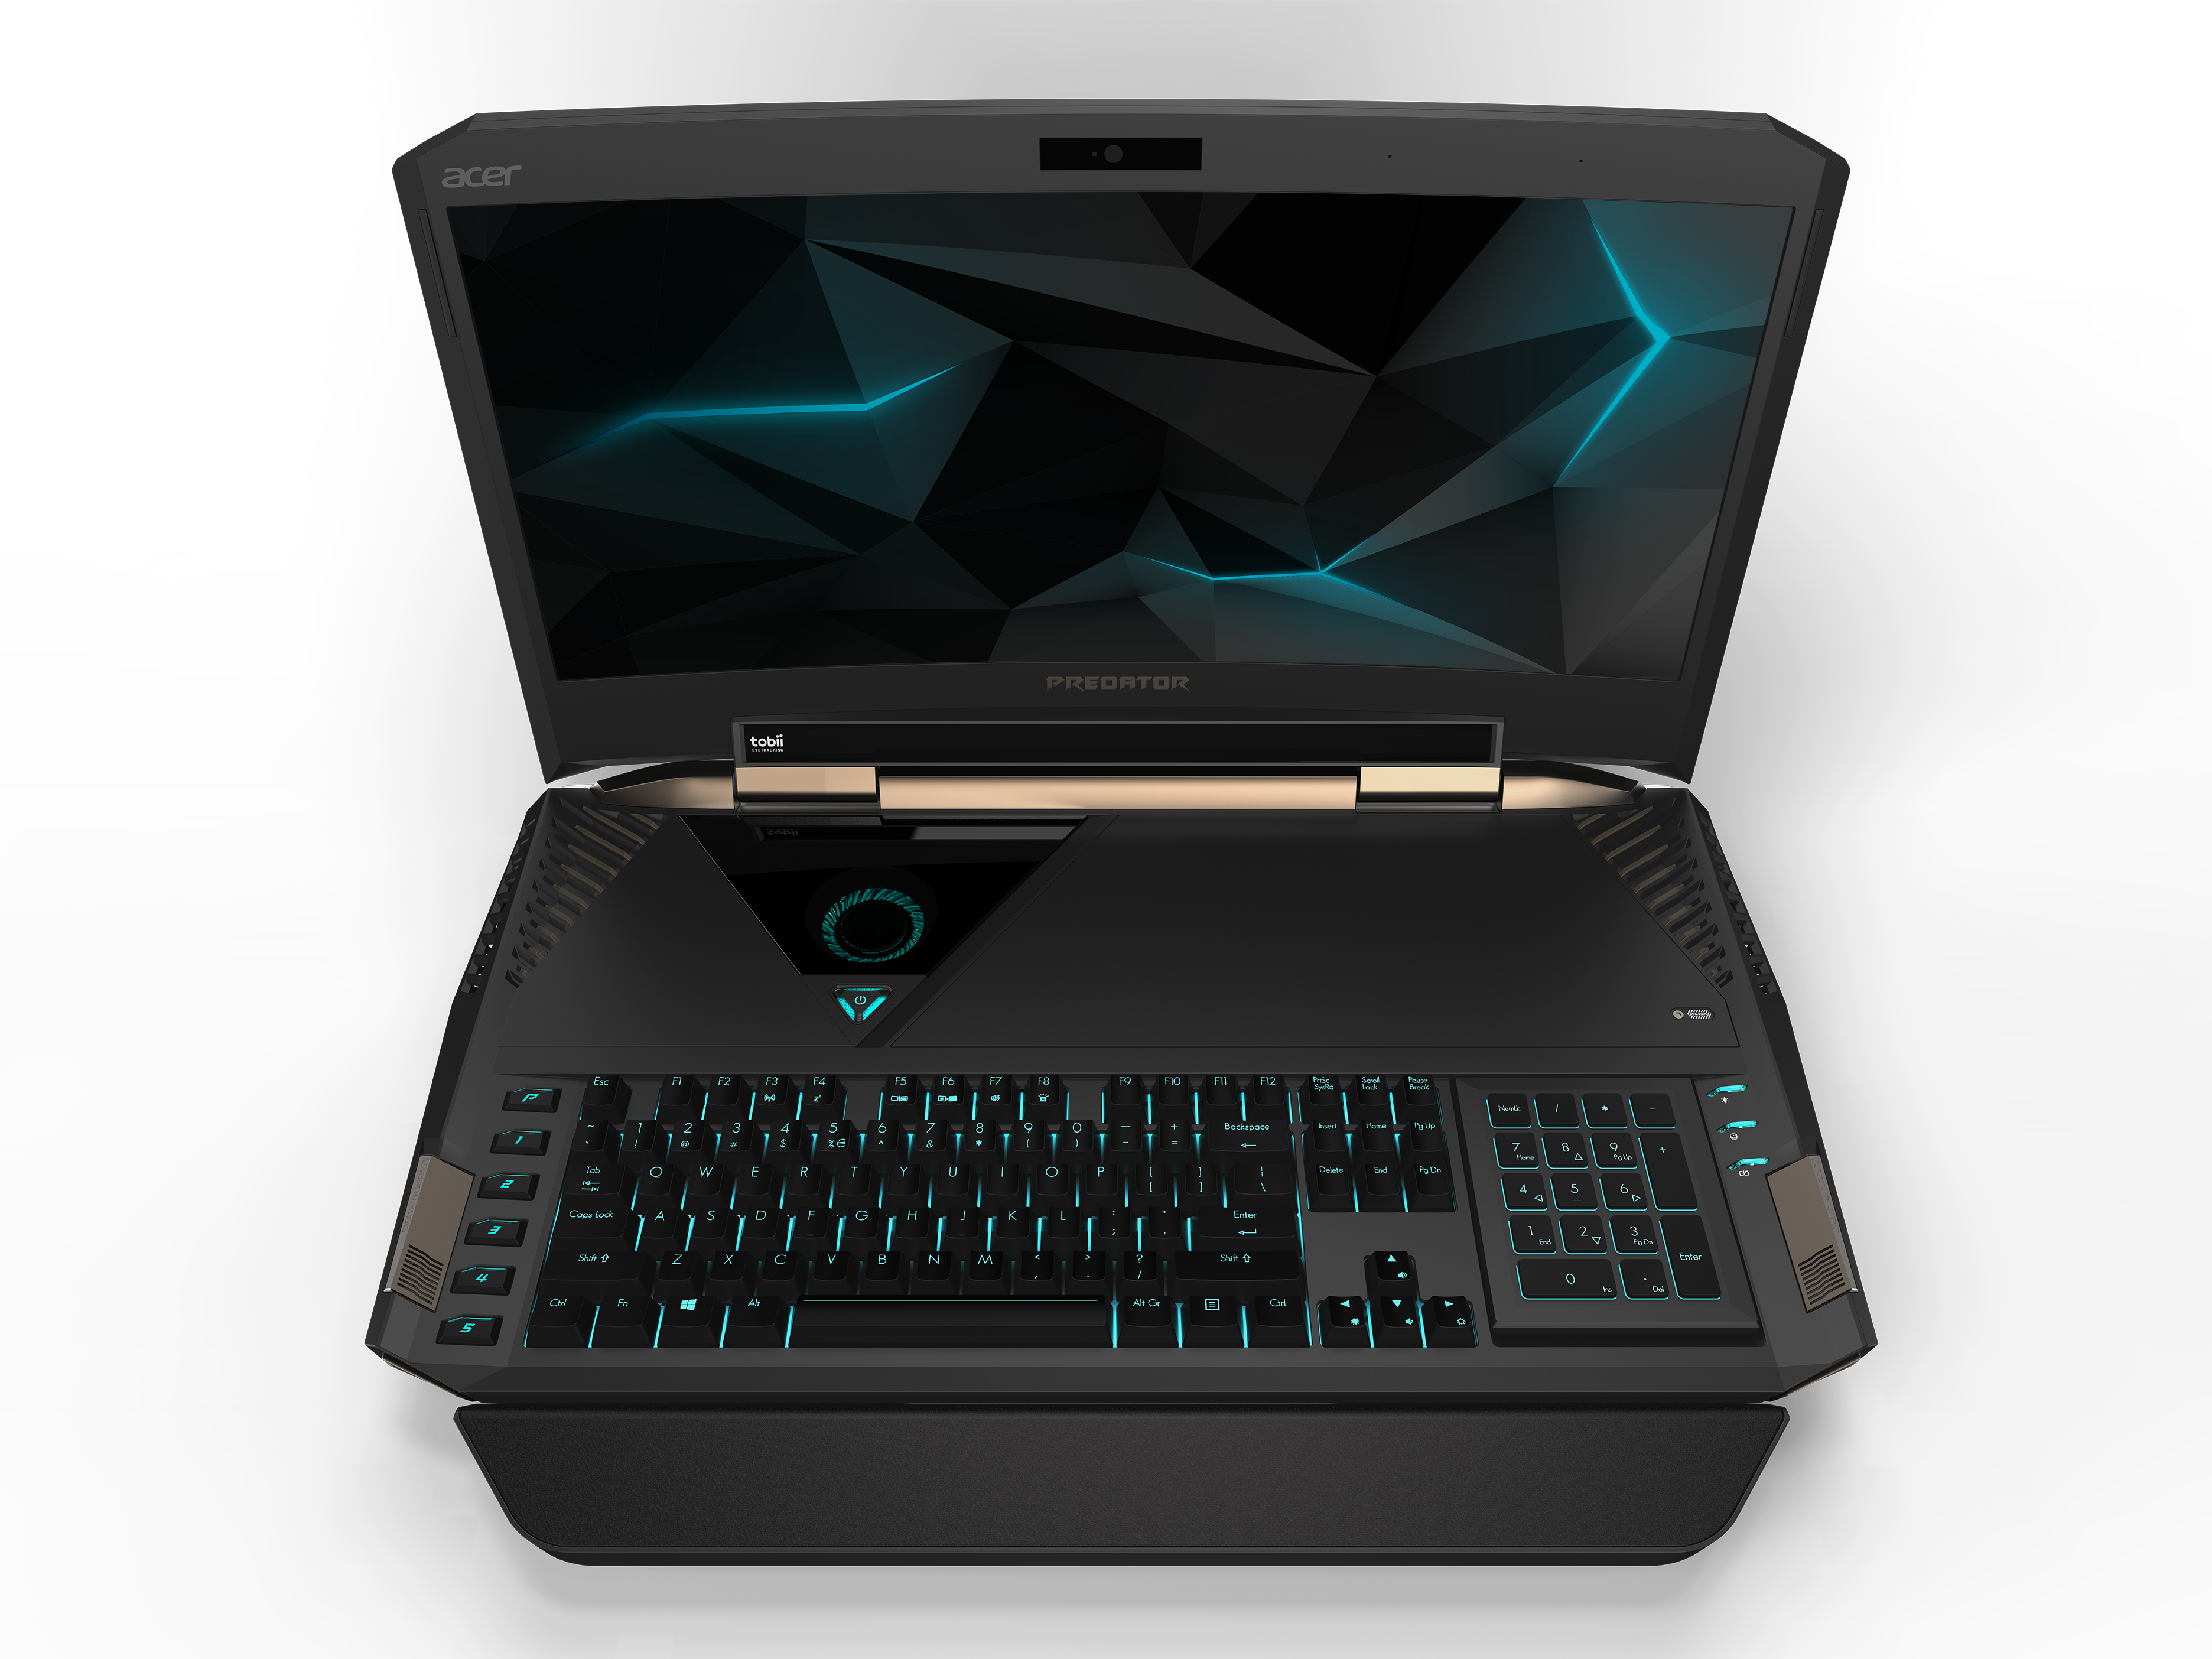 The Acer Predator 21 X is a curved display gaming notebook.